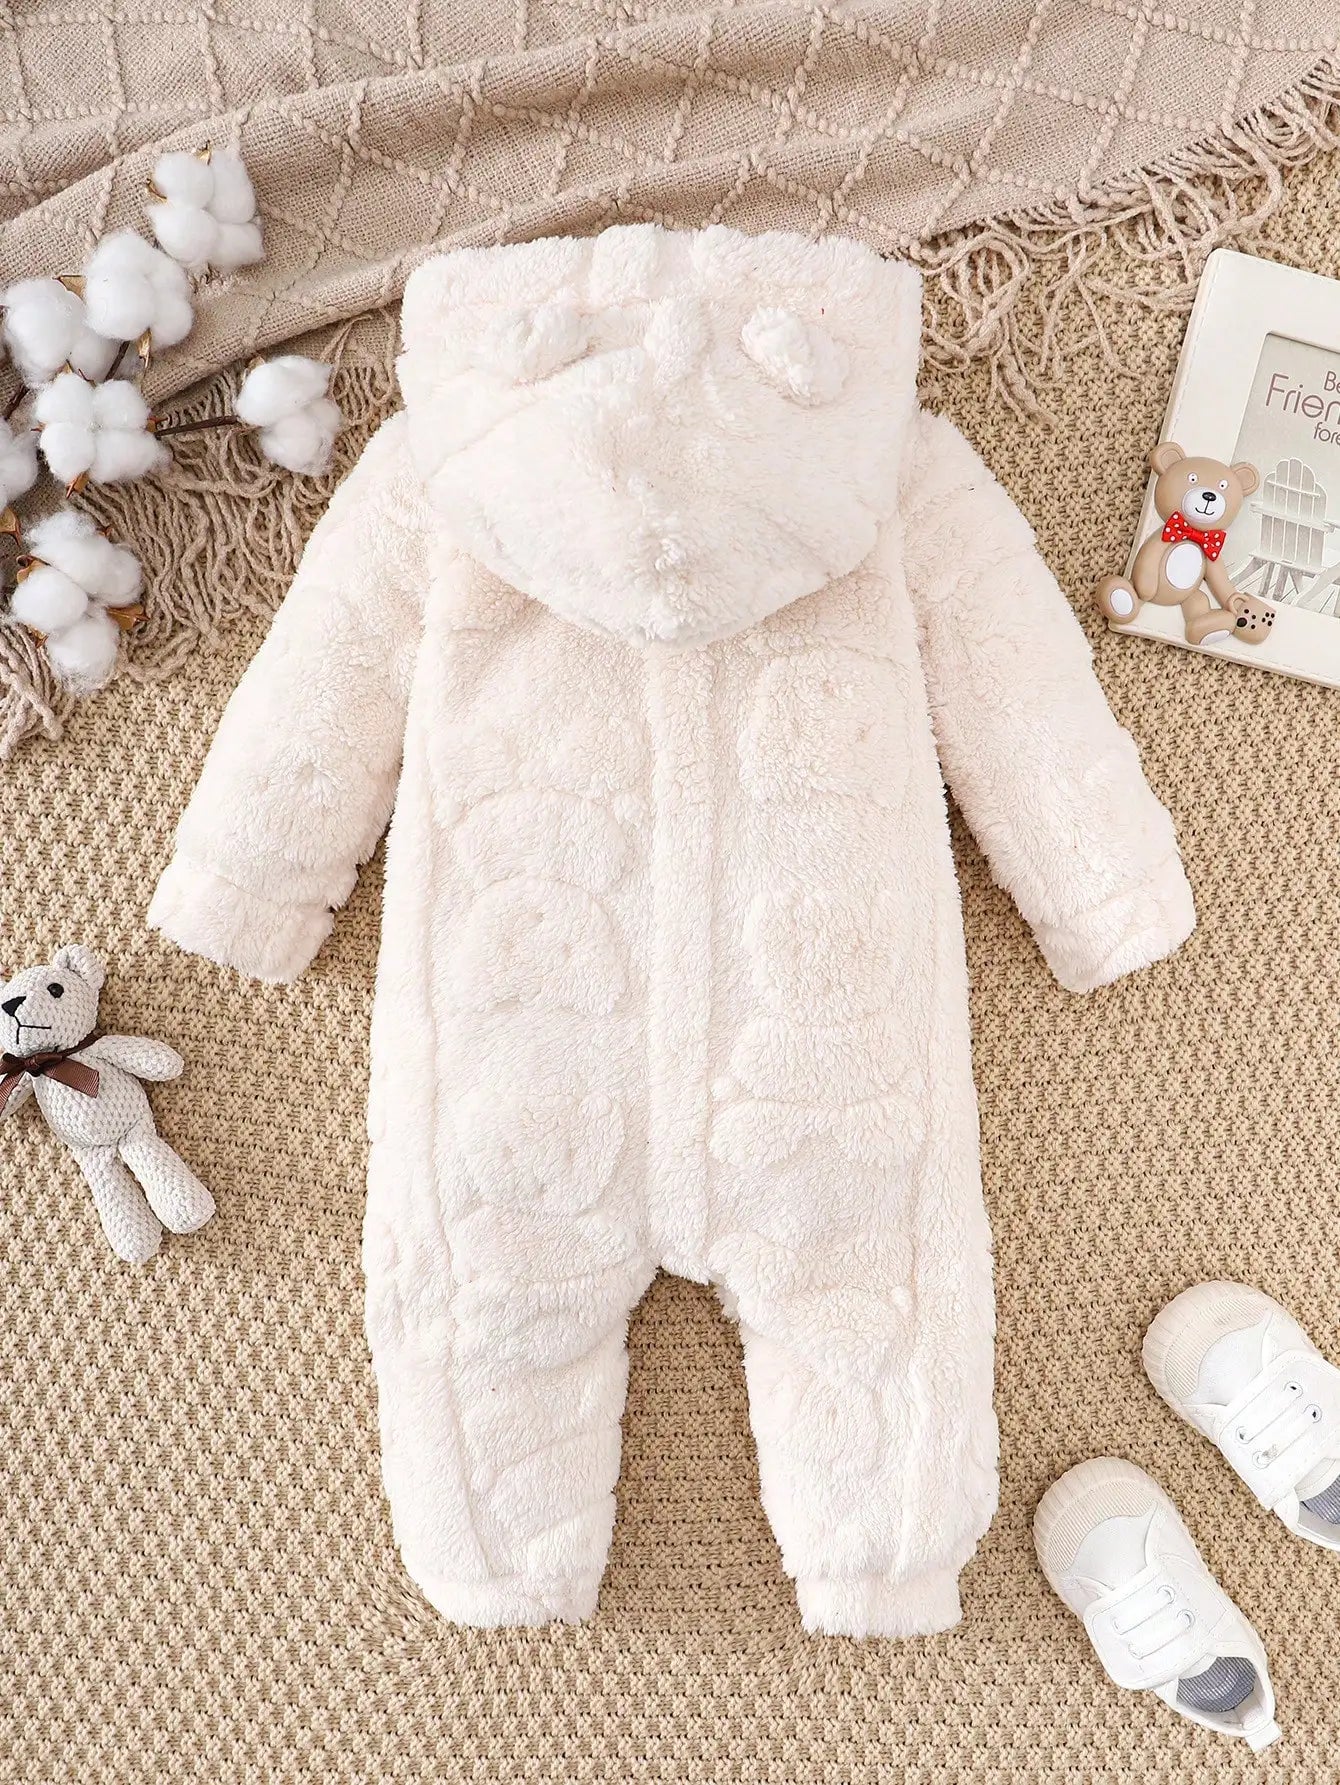 Baby Girl Baby Boy Baby Cute Soft Comfortable Fluffy Long Sleeve Hooded Romper Fall Winter